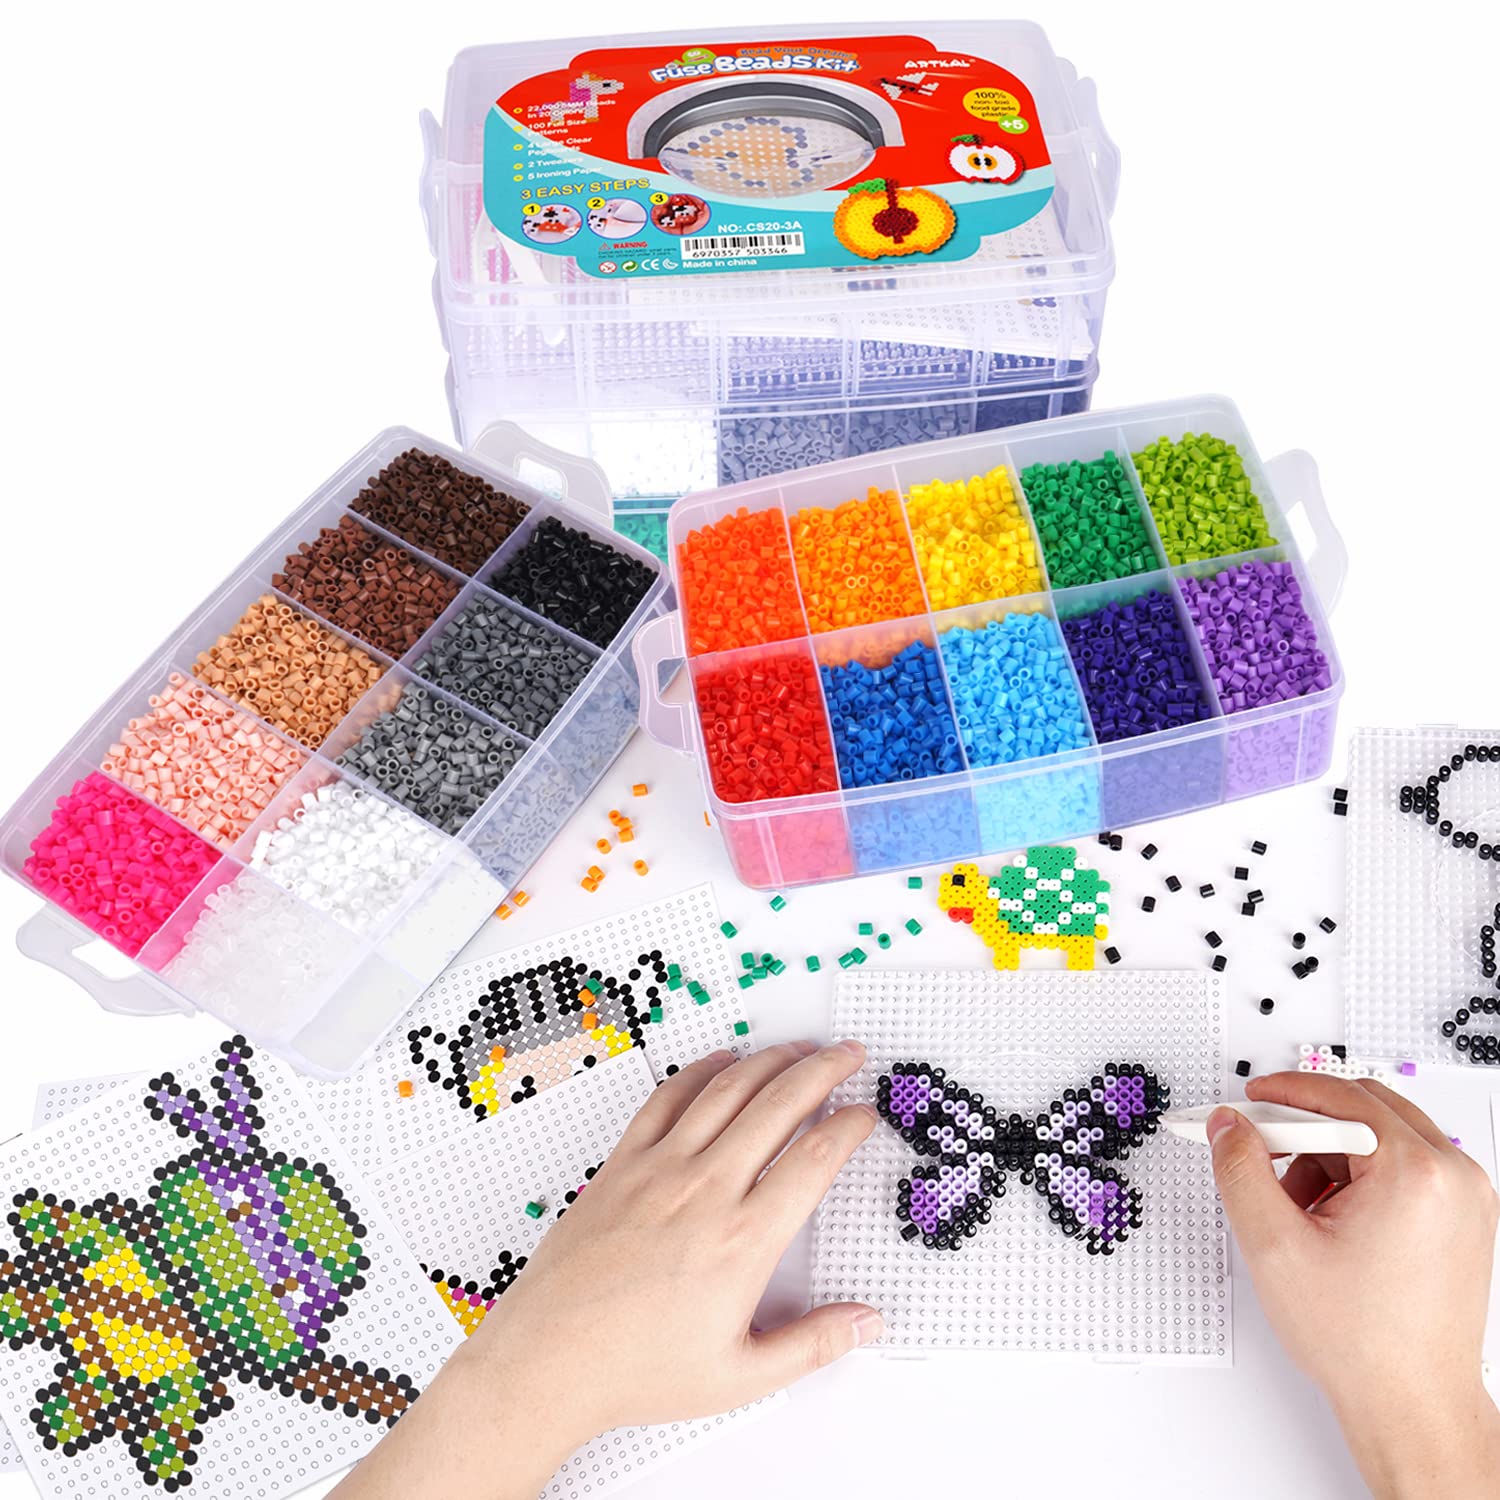 What are some tips for storing wholesale perler beads?